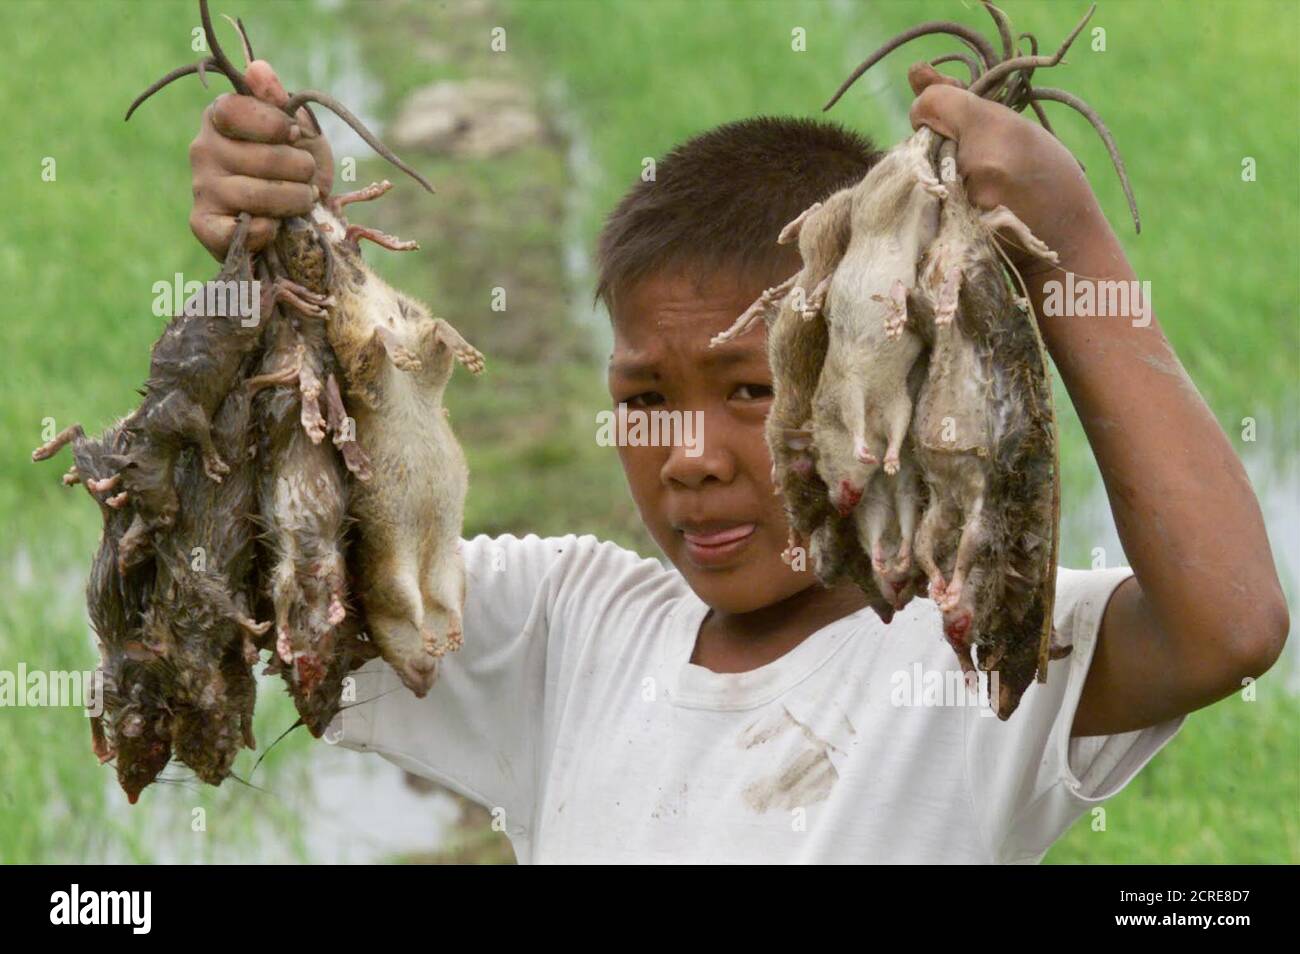 Filipino farm boy Dave Salvacion shows his catch of rats from the ricefields of the Santa Rosa town of Nueva Ecija, north of Manila February 3. The government has launched a rat control campaign, prodding the farmers and residents of Santa Rosa to catch rats in exchange for cash. The rat infestation has alarmed government agriculturists for having destroyed more than 20% of the 80,000 hectares of rice fields.  RR/PB Stock Photo